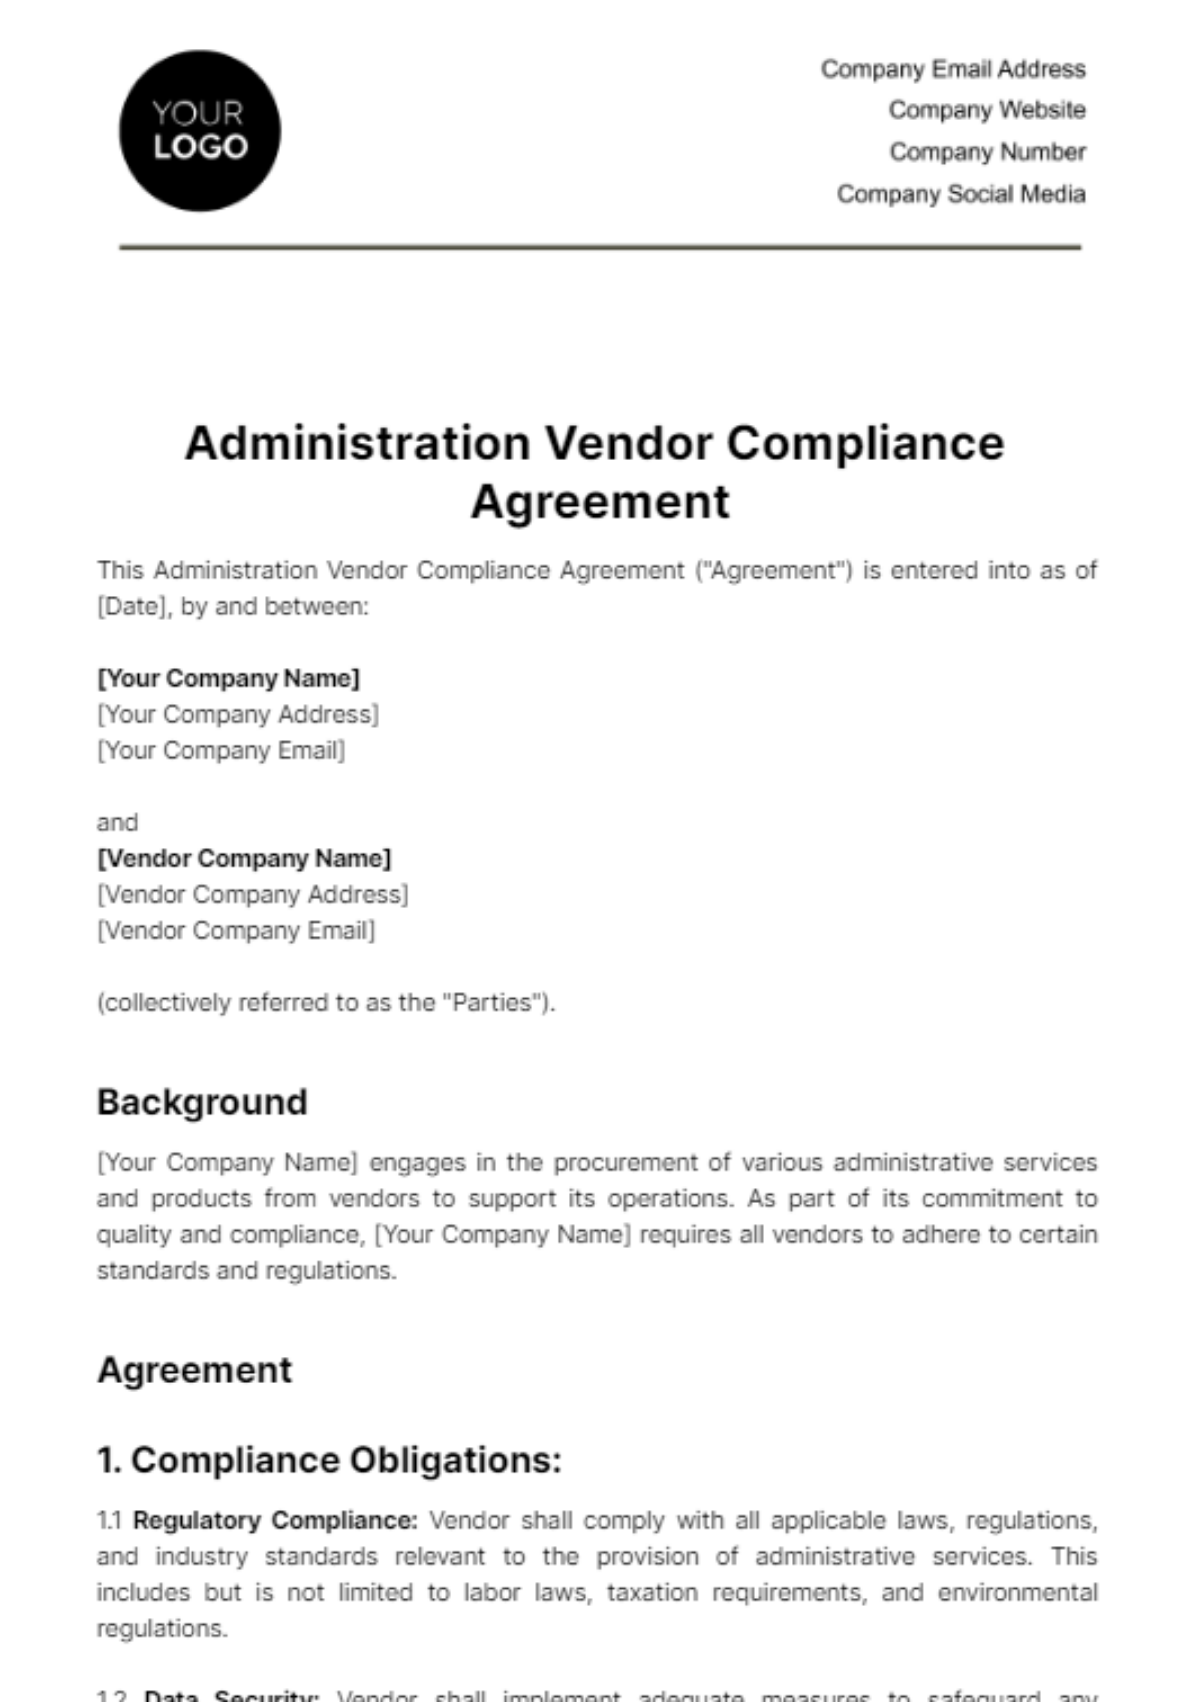 Administration Vendor Compliance Agreement Template